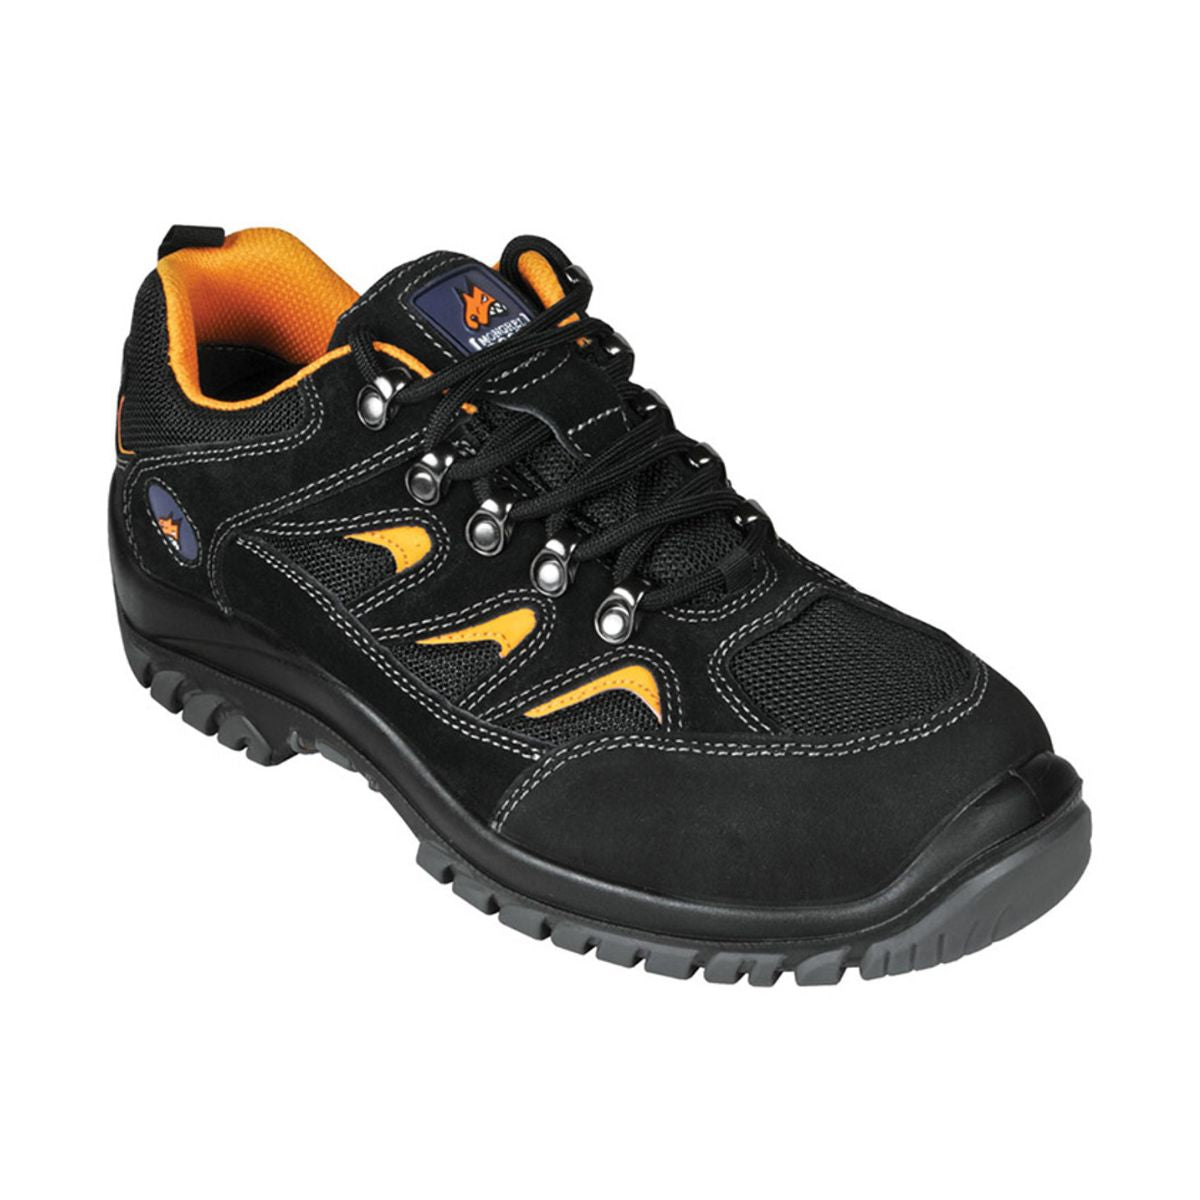 Mongrel Women's Boots Black Sports Safety Shoes #793 Size 6